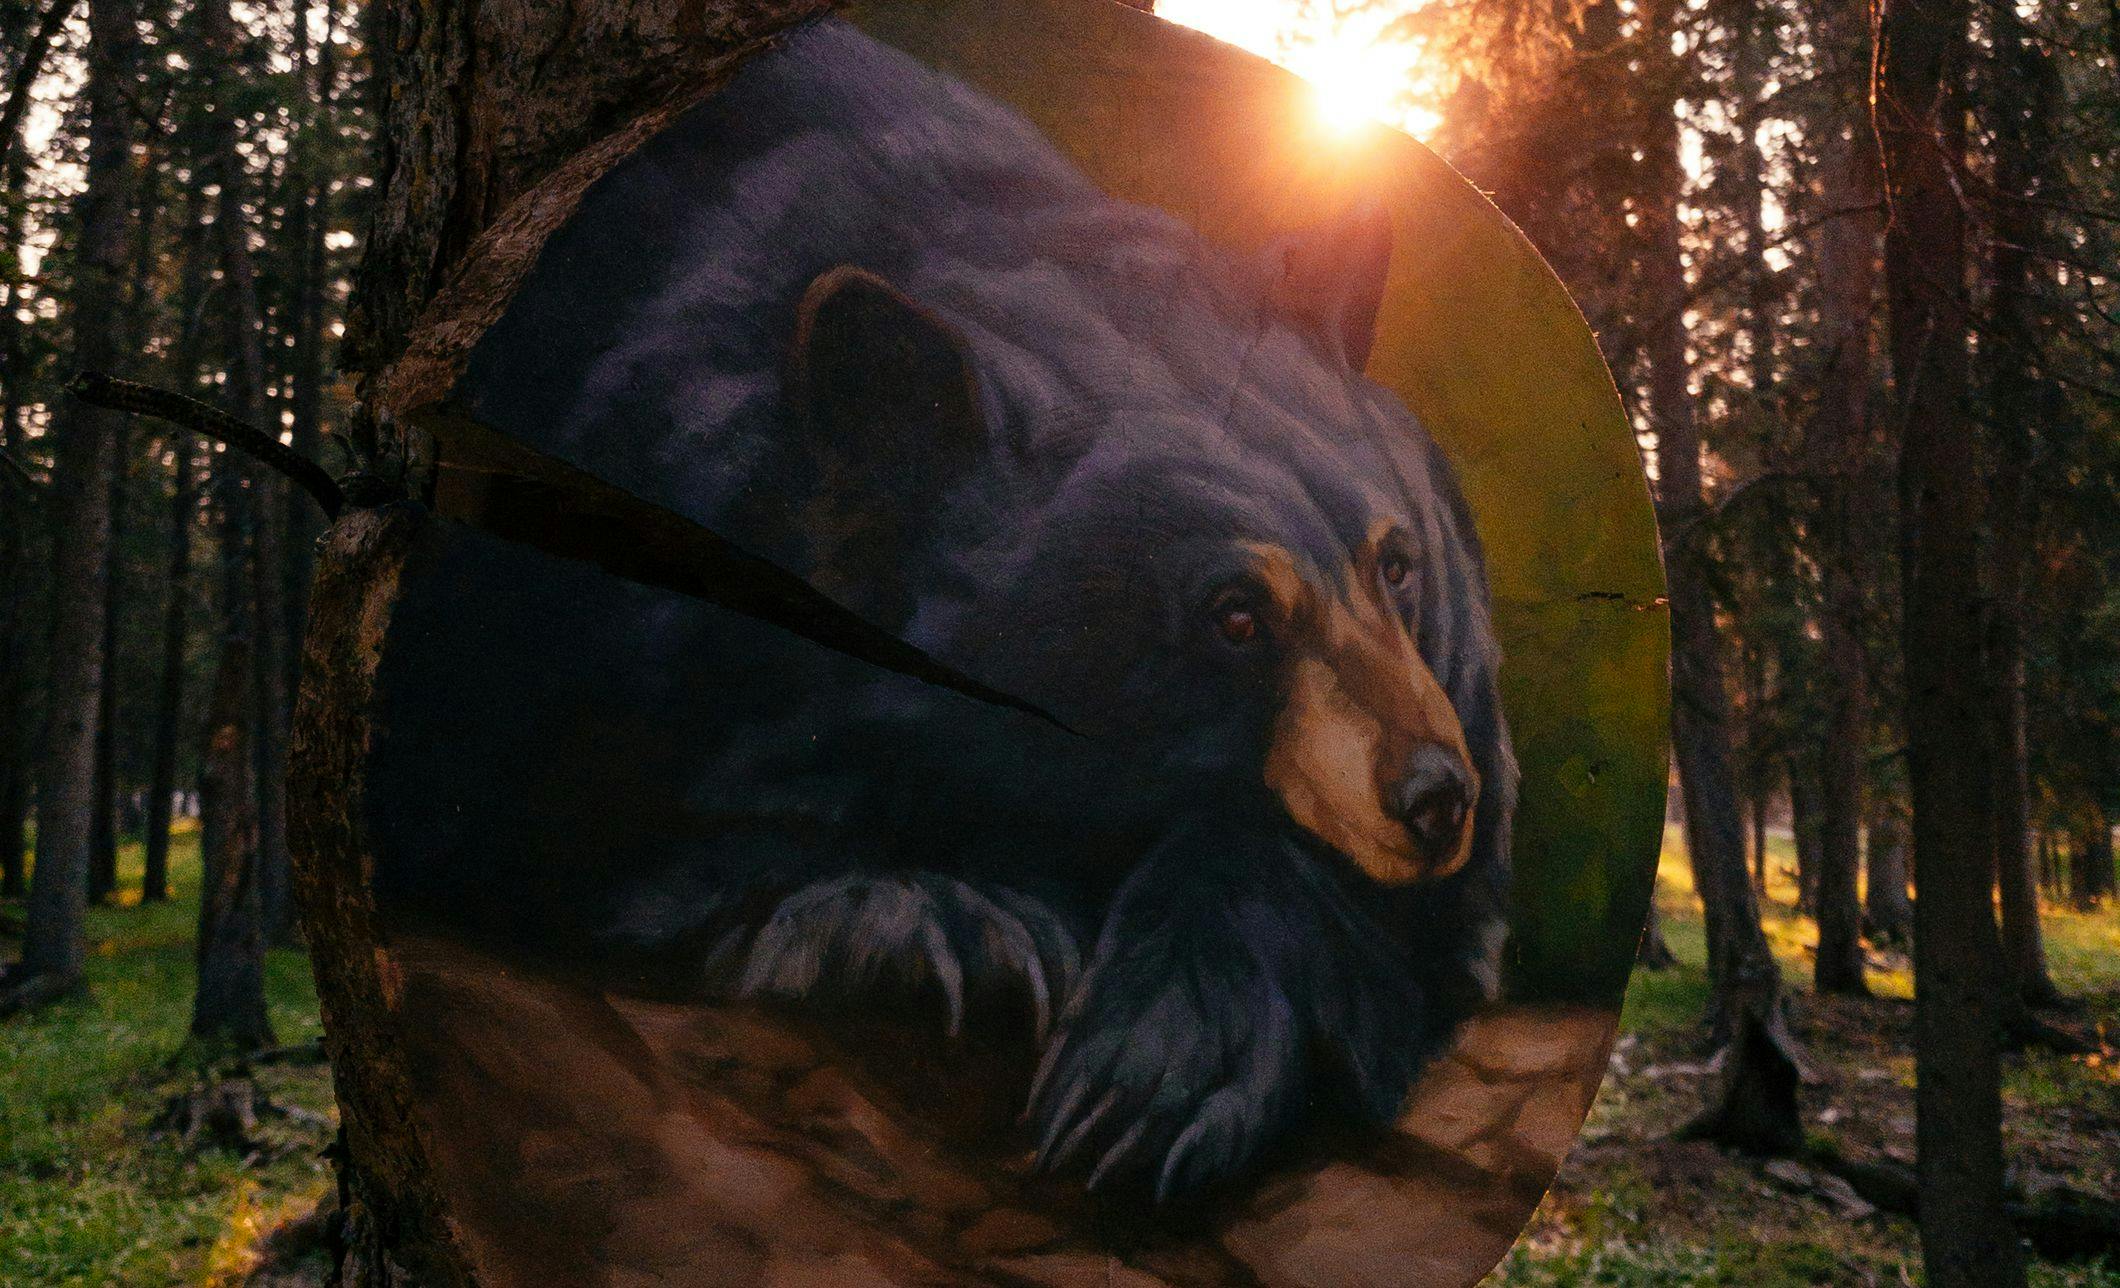 Black Bear on the Art in Nature Trail 2021